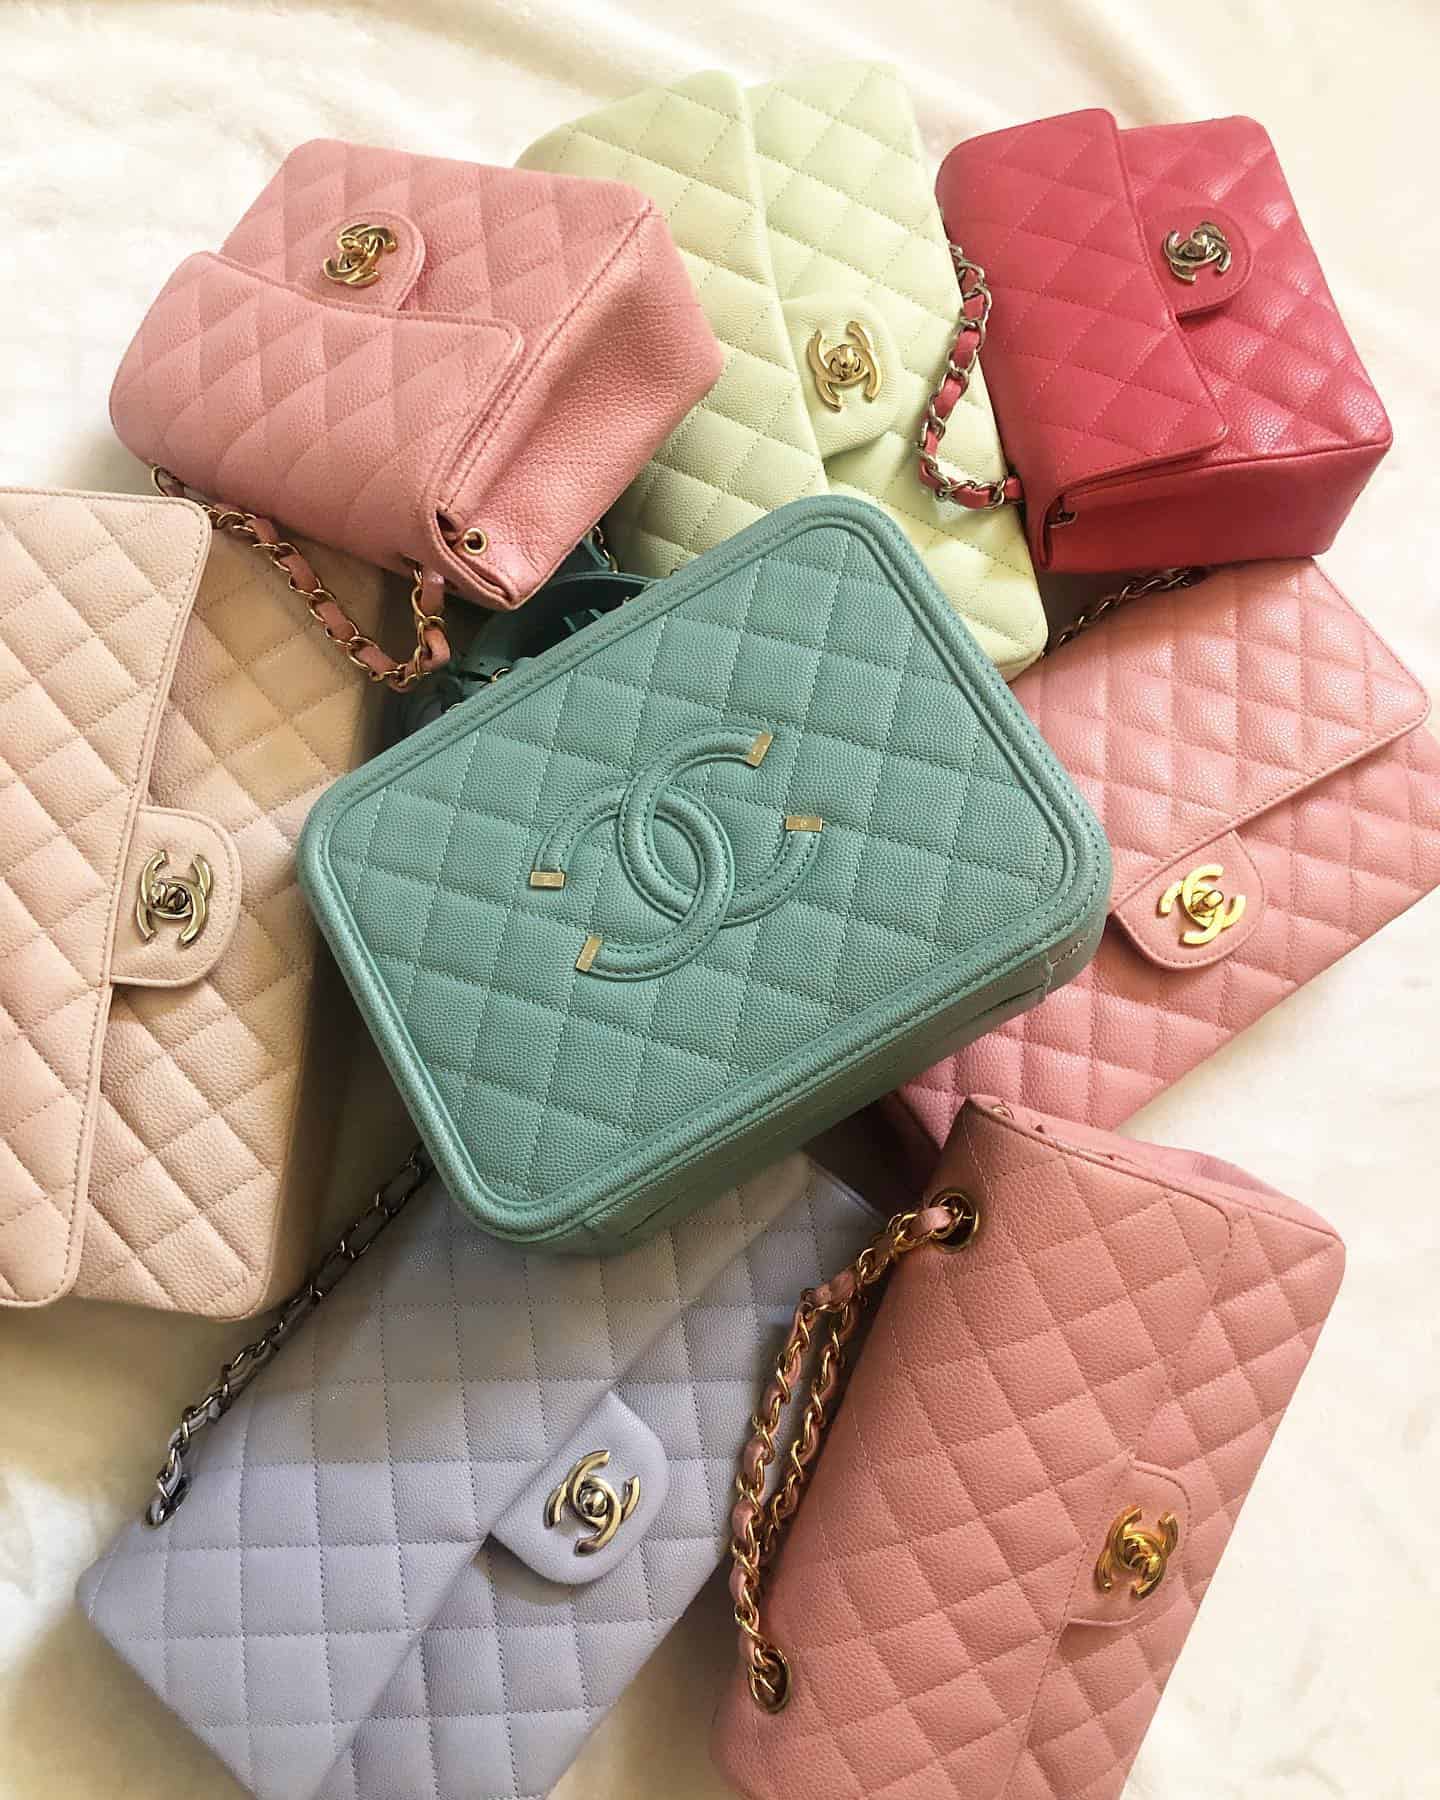 brand new chanel bags